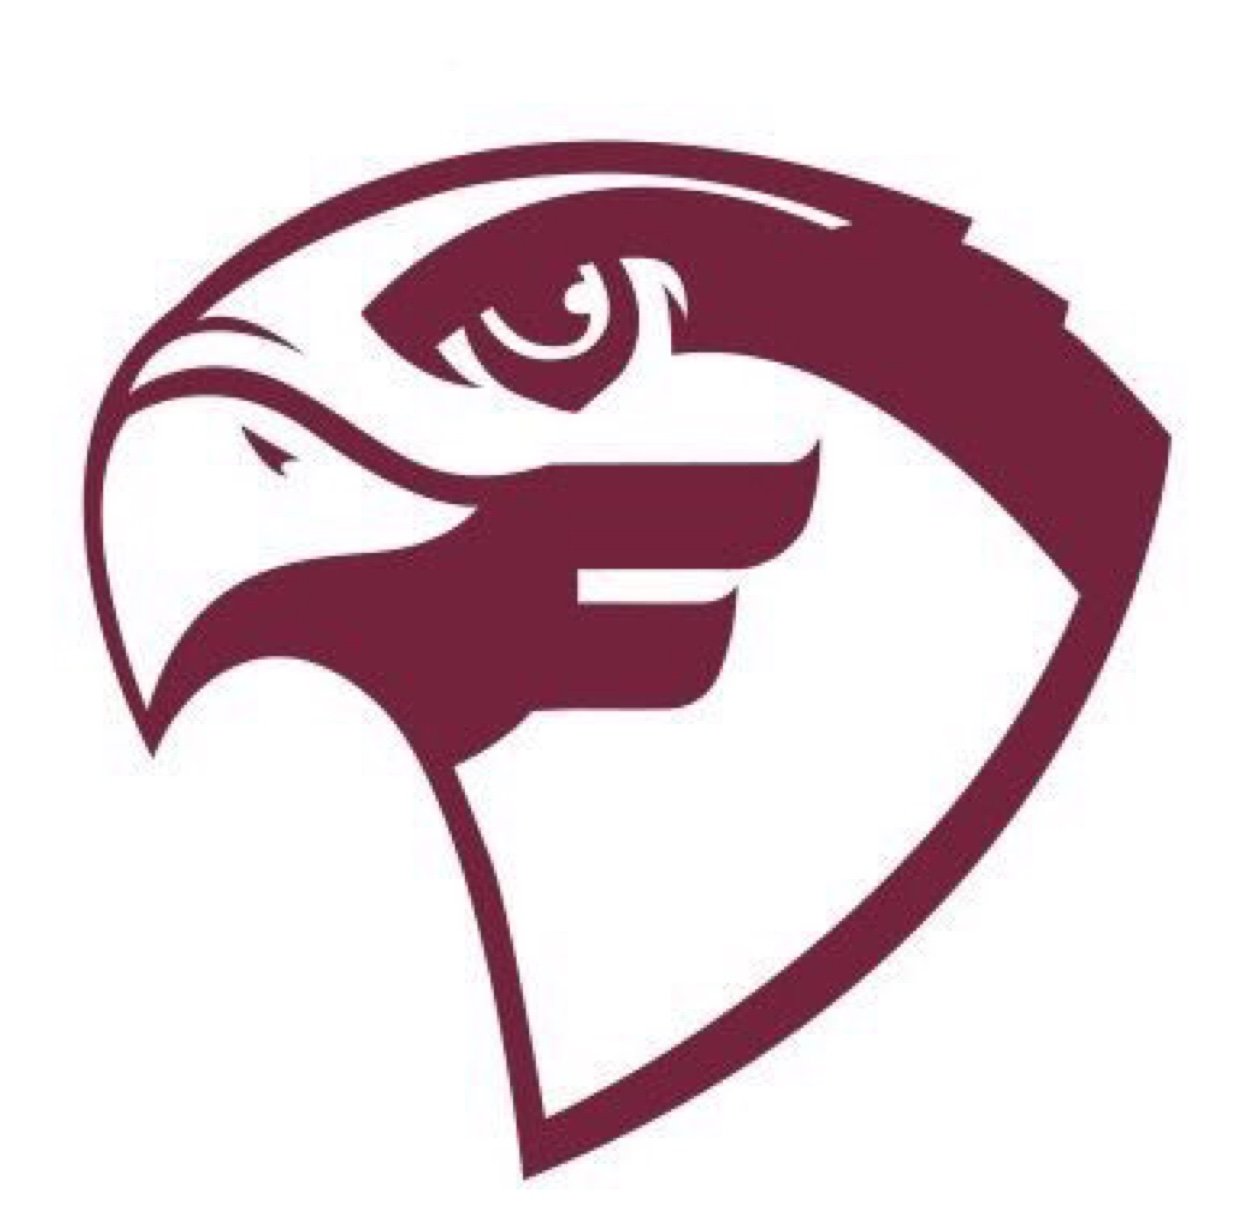 The Official Fairmont State University Women’s Basketball Team Twitter Page! 🏀🏀